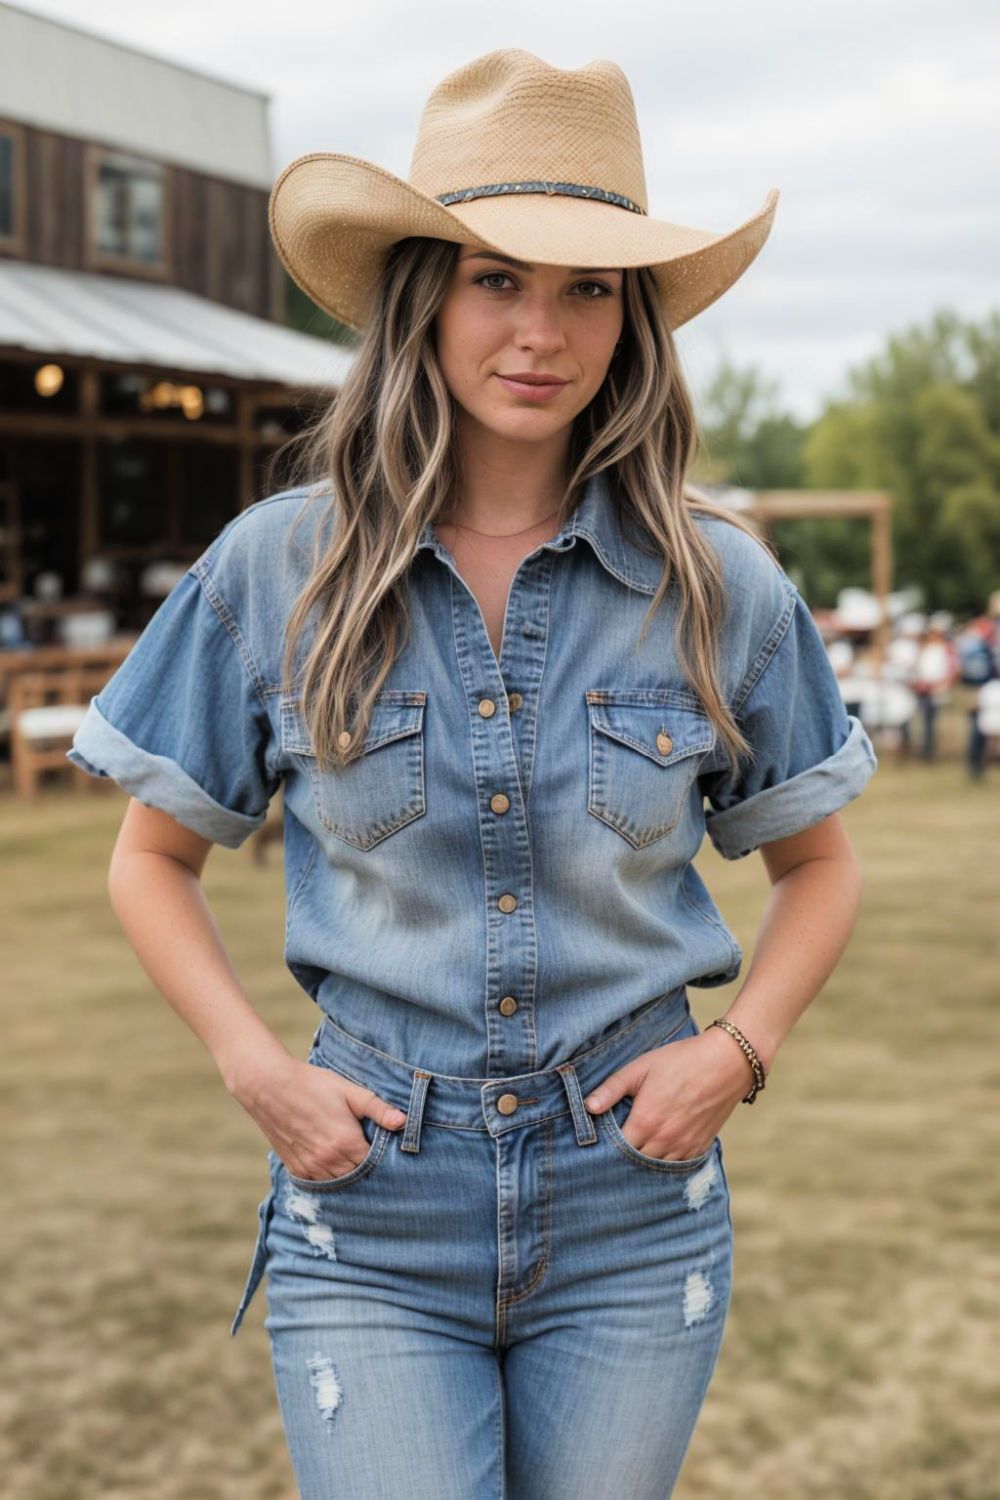 cowboy hat and jeans